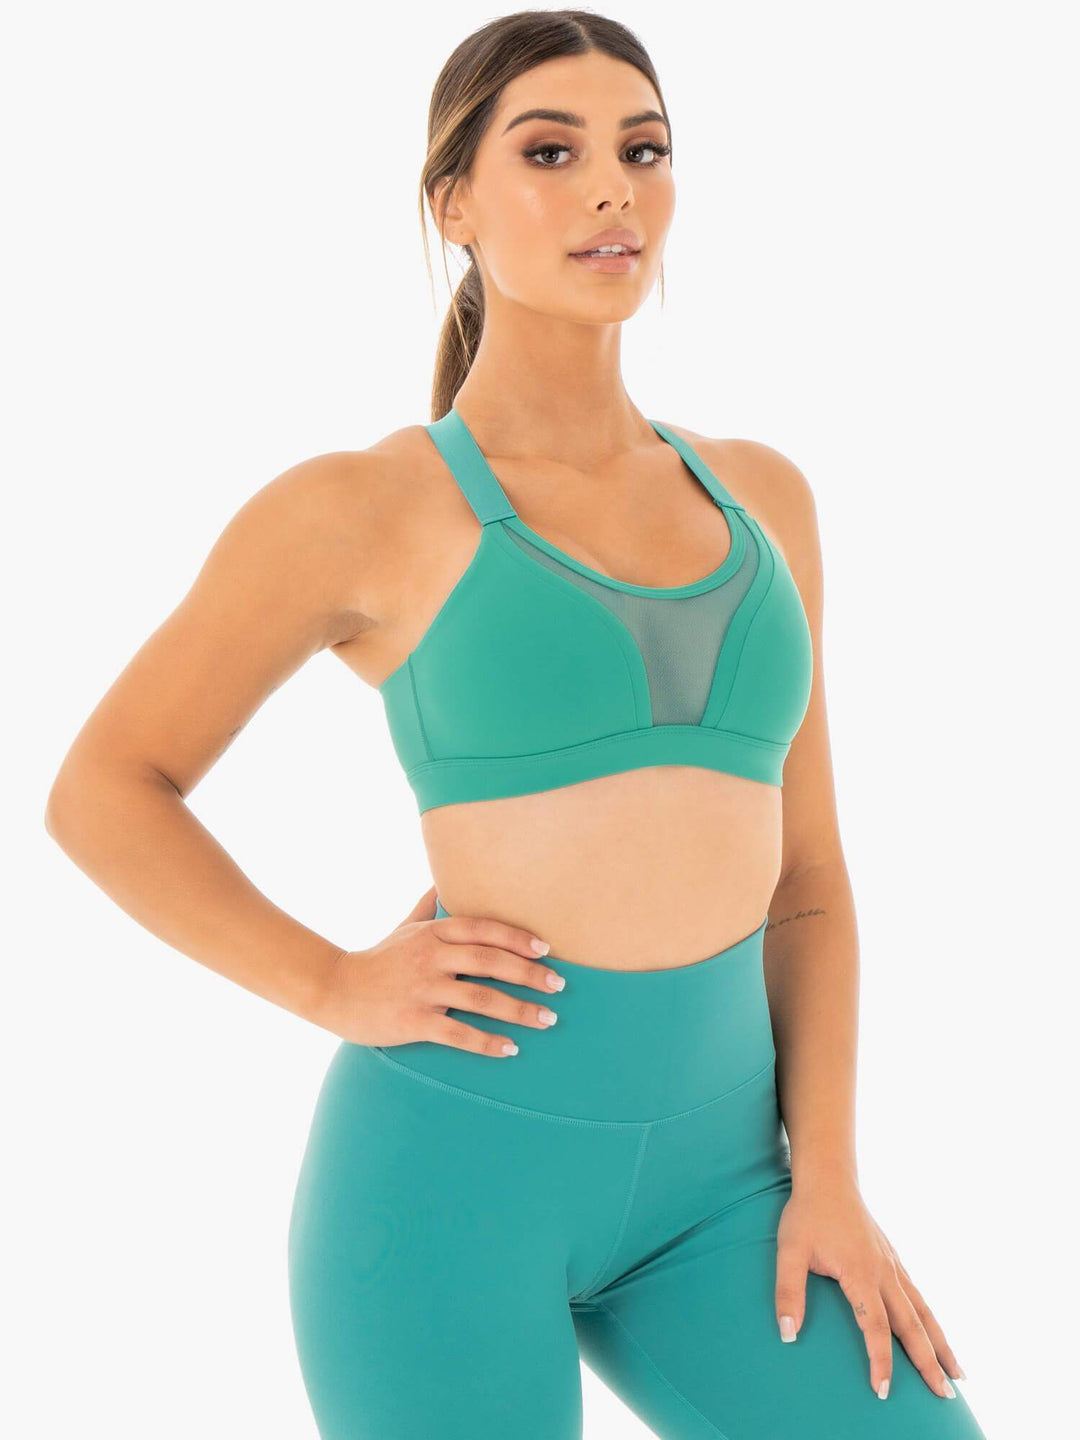 Collide Mesh Contour Sports Bra - Turquoise Clothing Ryderwear 